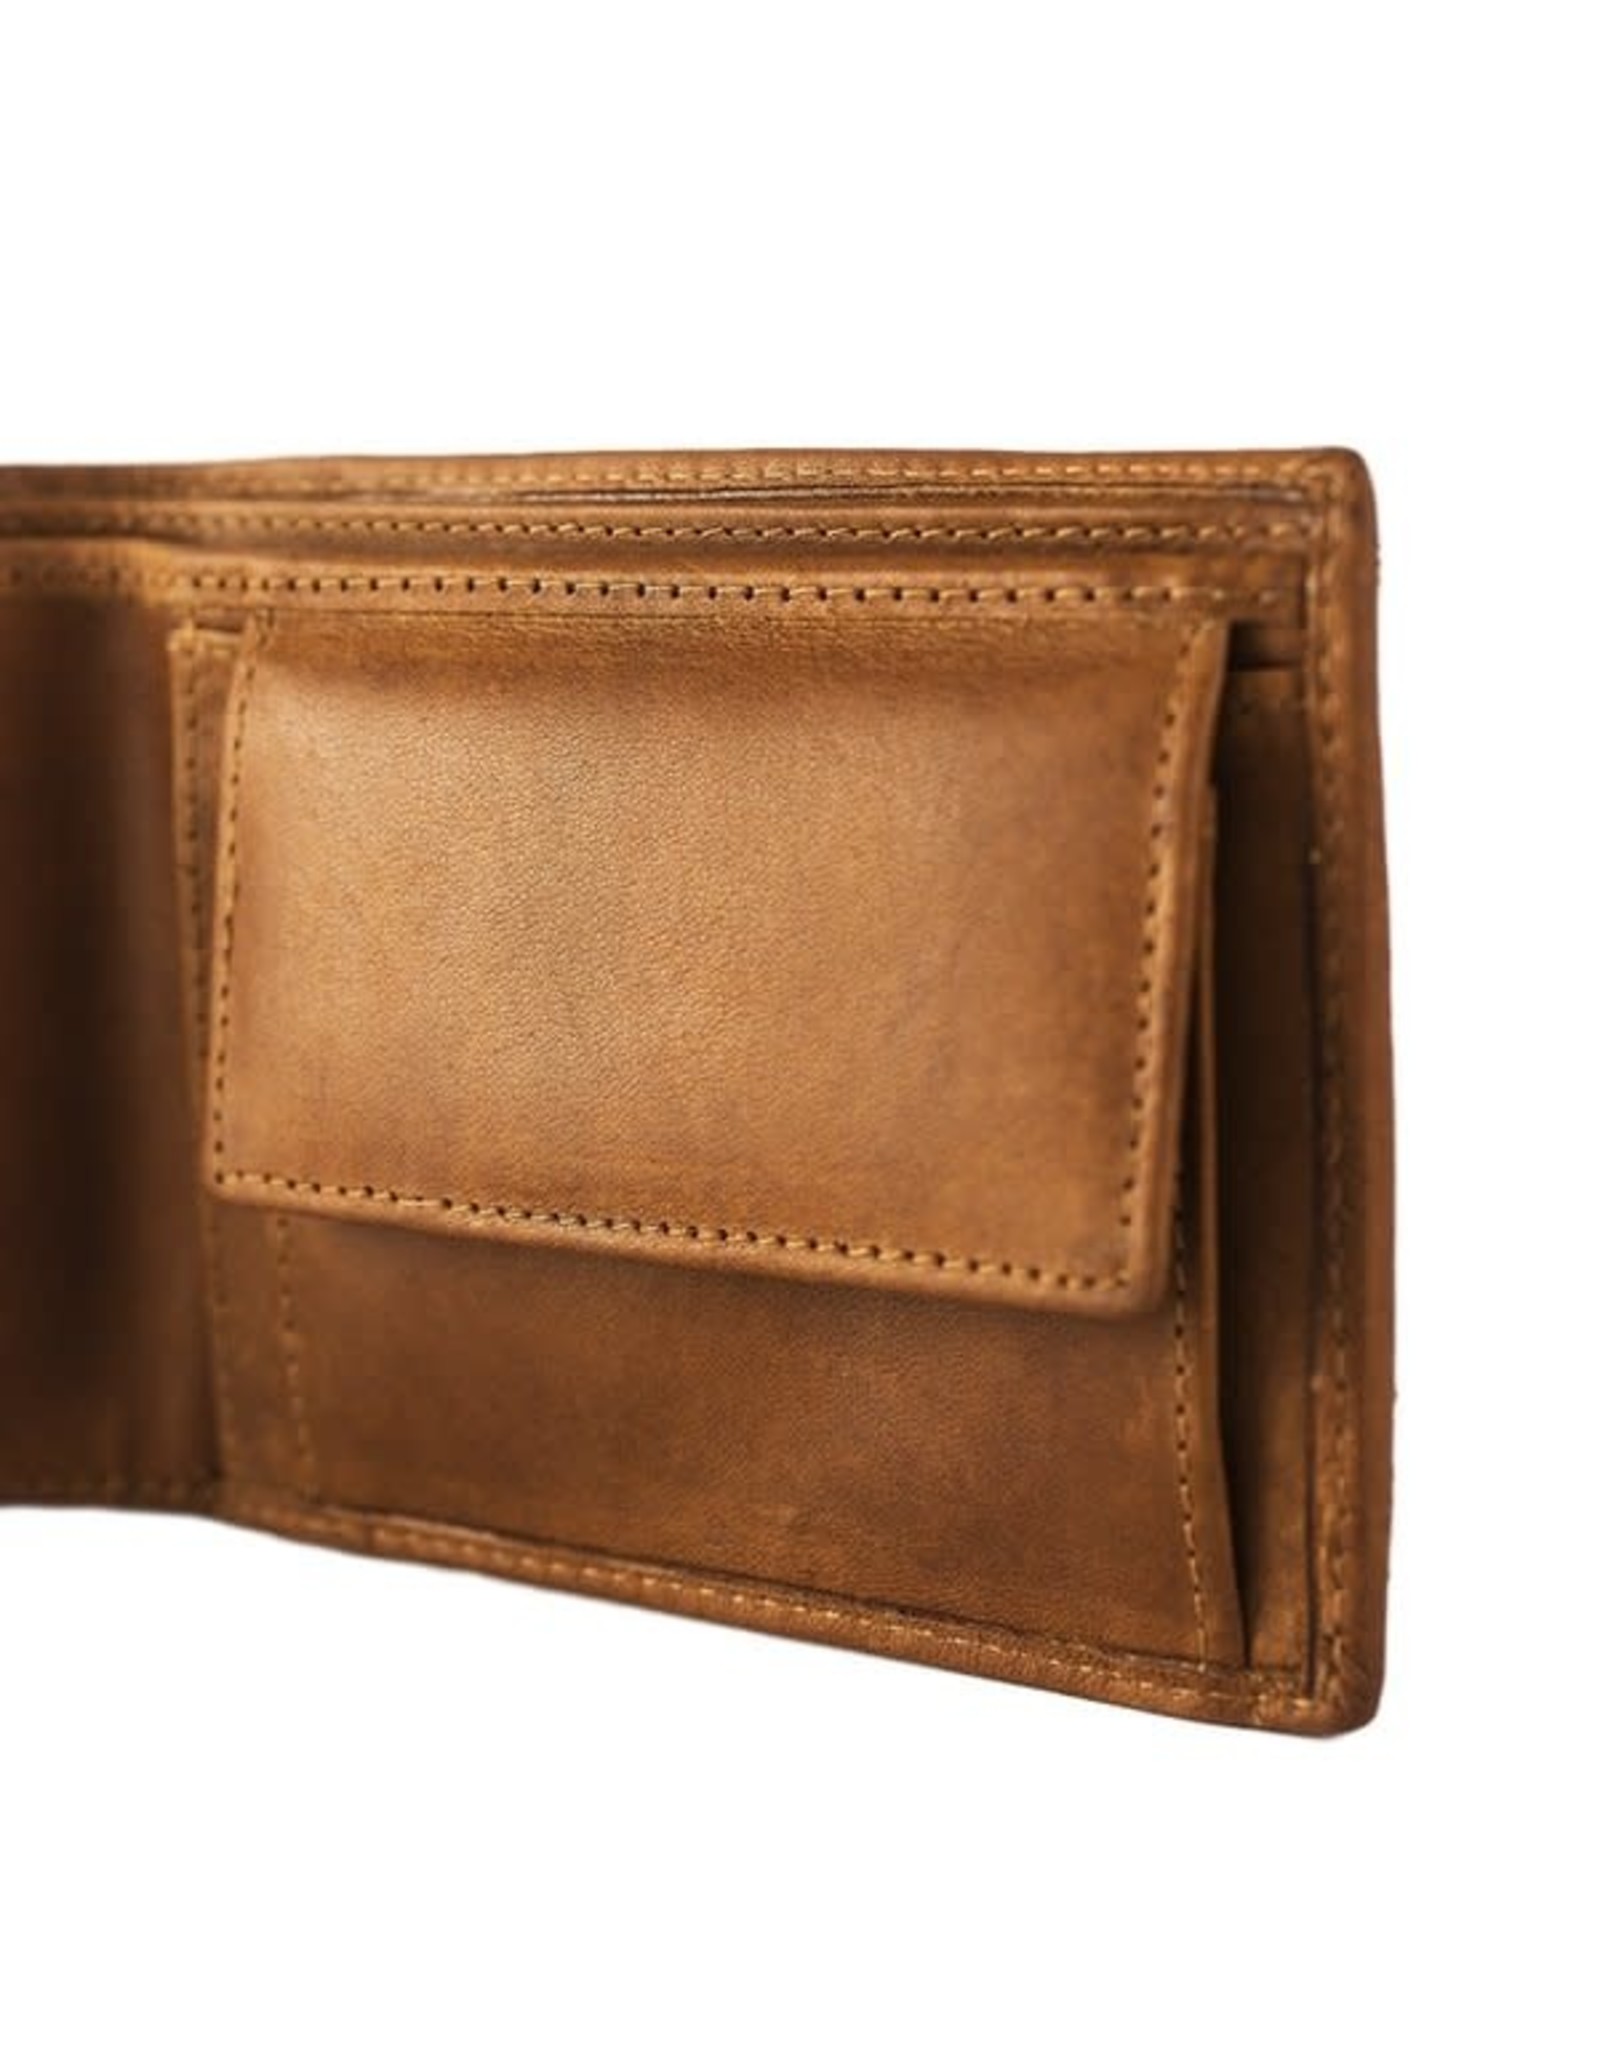 Chesterfield The Chesterfield Brand Wallet Walid